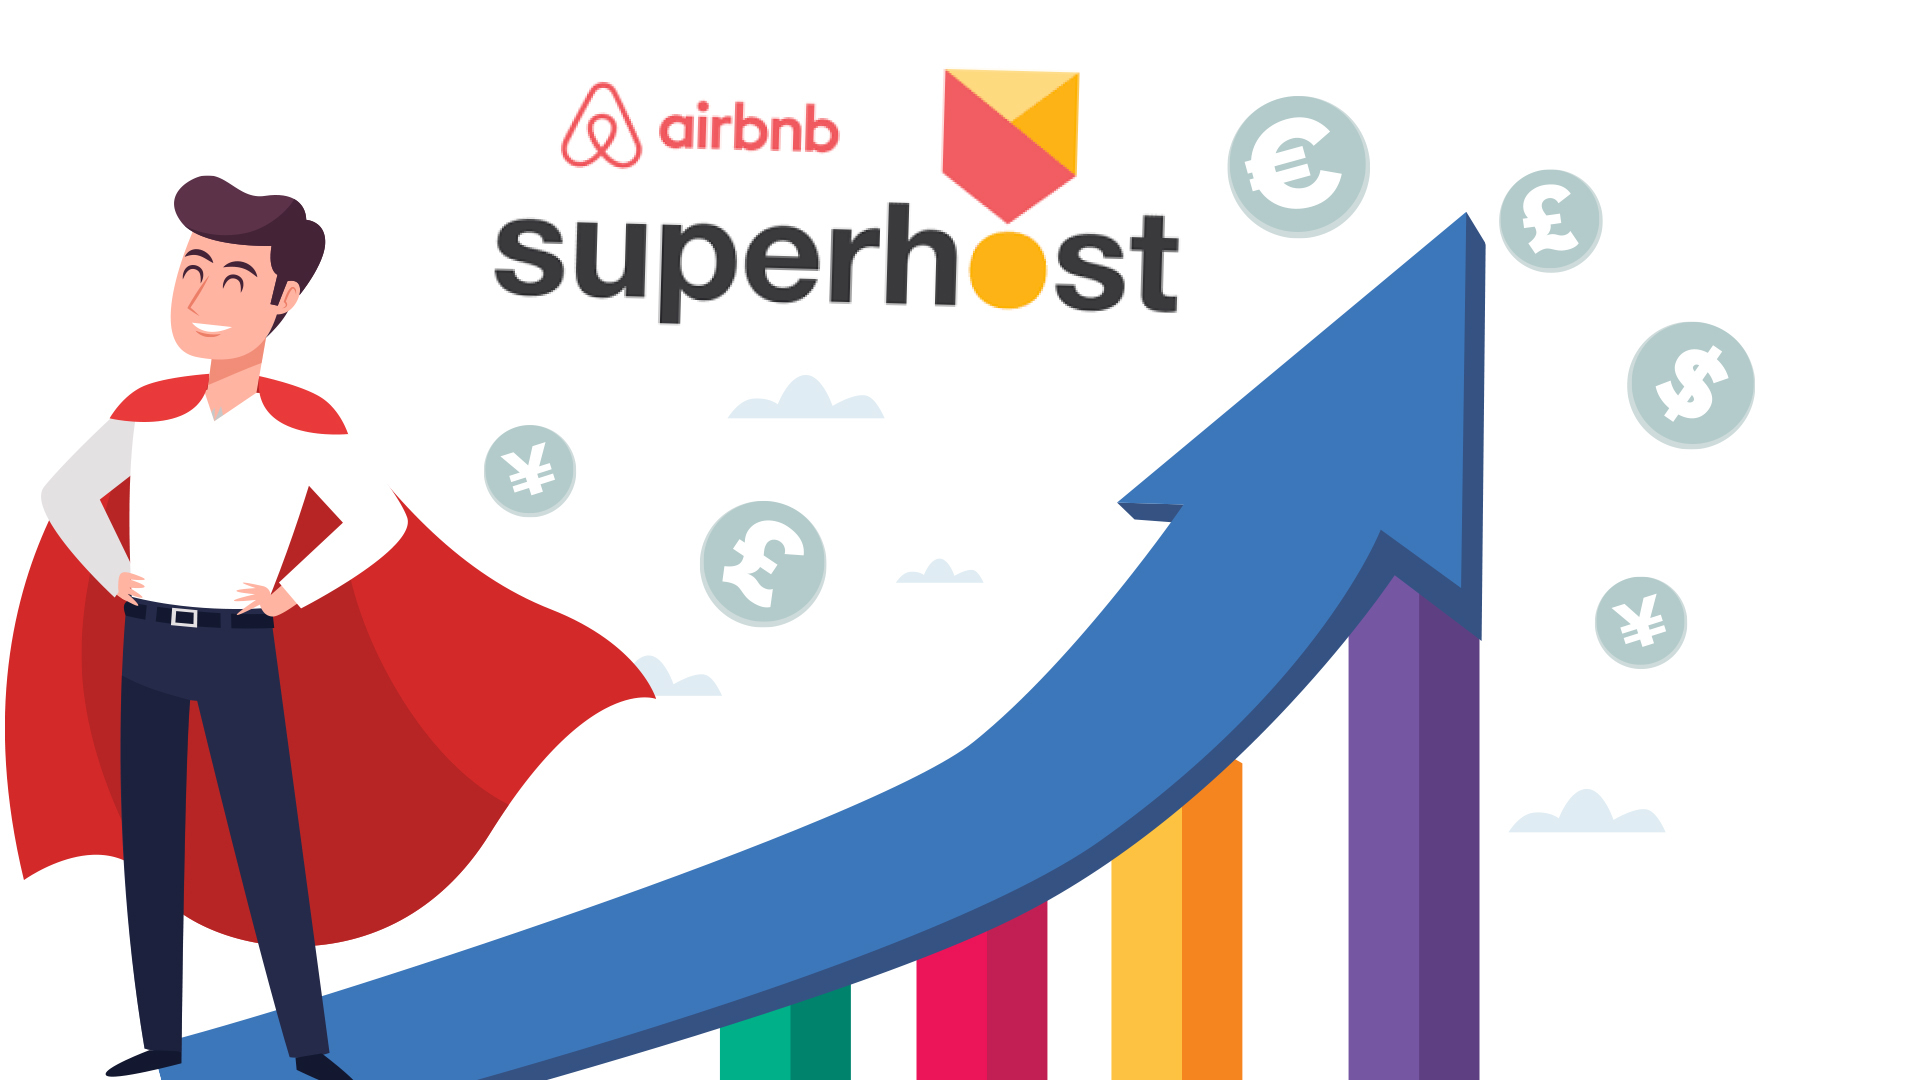 An illustration showing an Airbnb Superhost with symbols indicating increased revenue, labeled 'How to become an Airbnb Superhost.' Various currency icons are depicted to represent earnings.